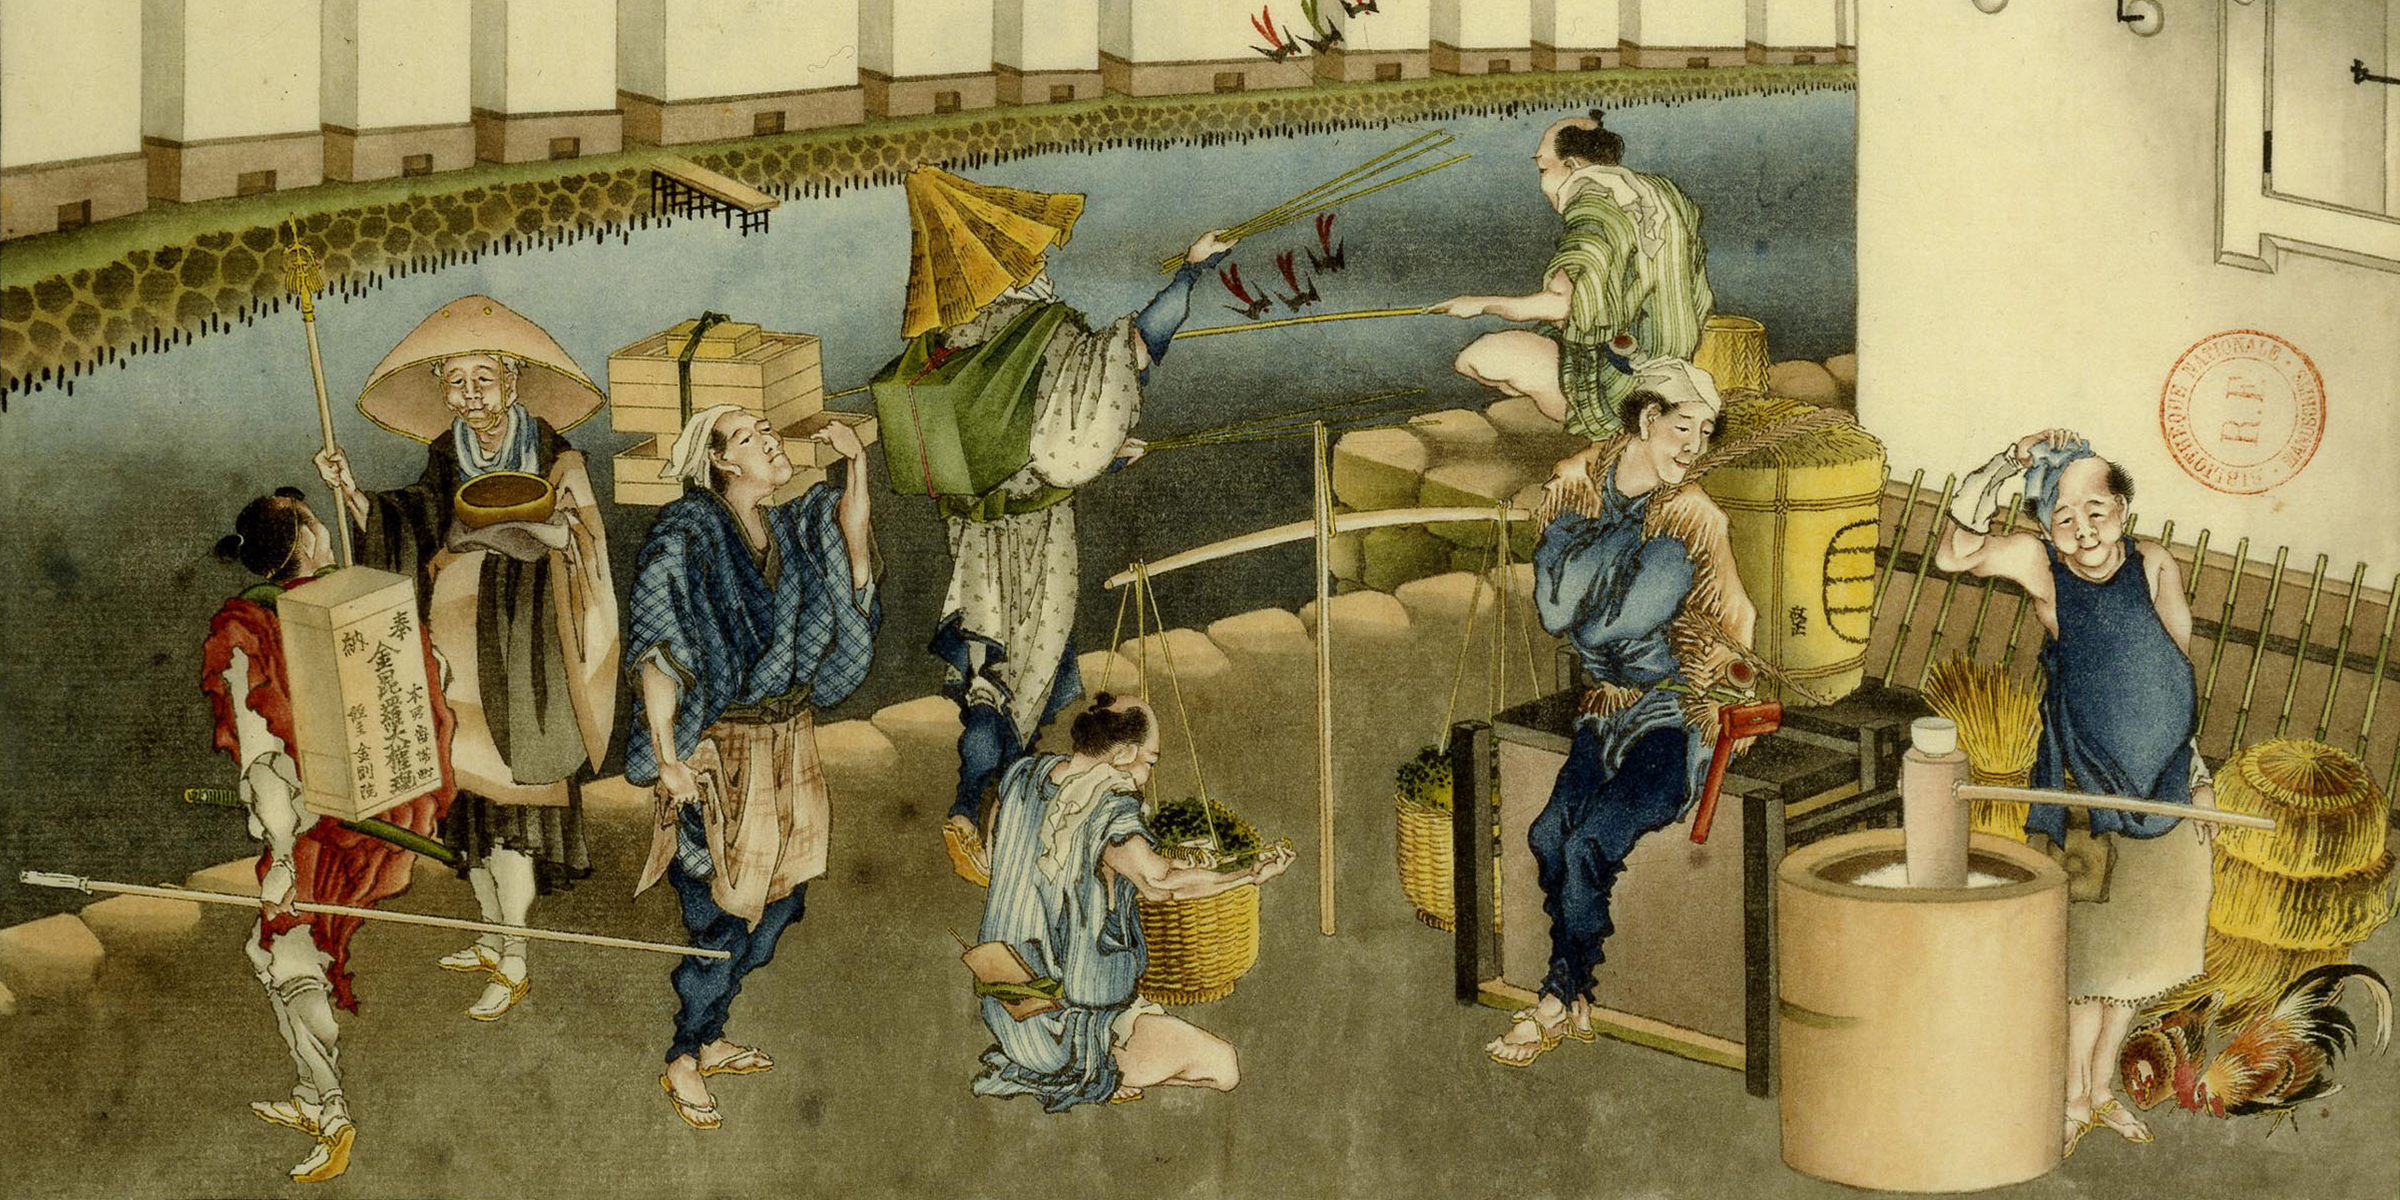 Street Scene in Nihonbashi, attributed to the workshop of Hokusai, c. 1826. © BnF, Dist. RMN-Grand Palais / Art Resource, NY.